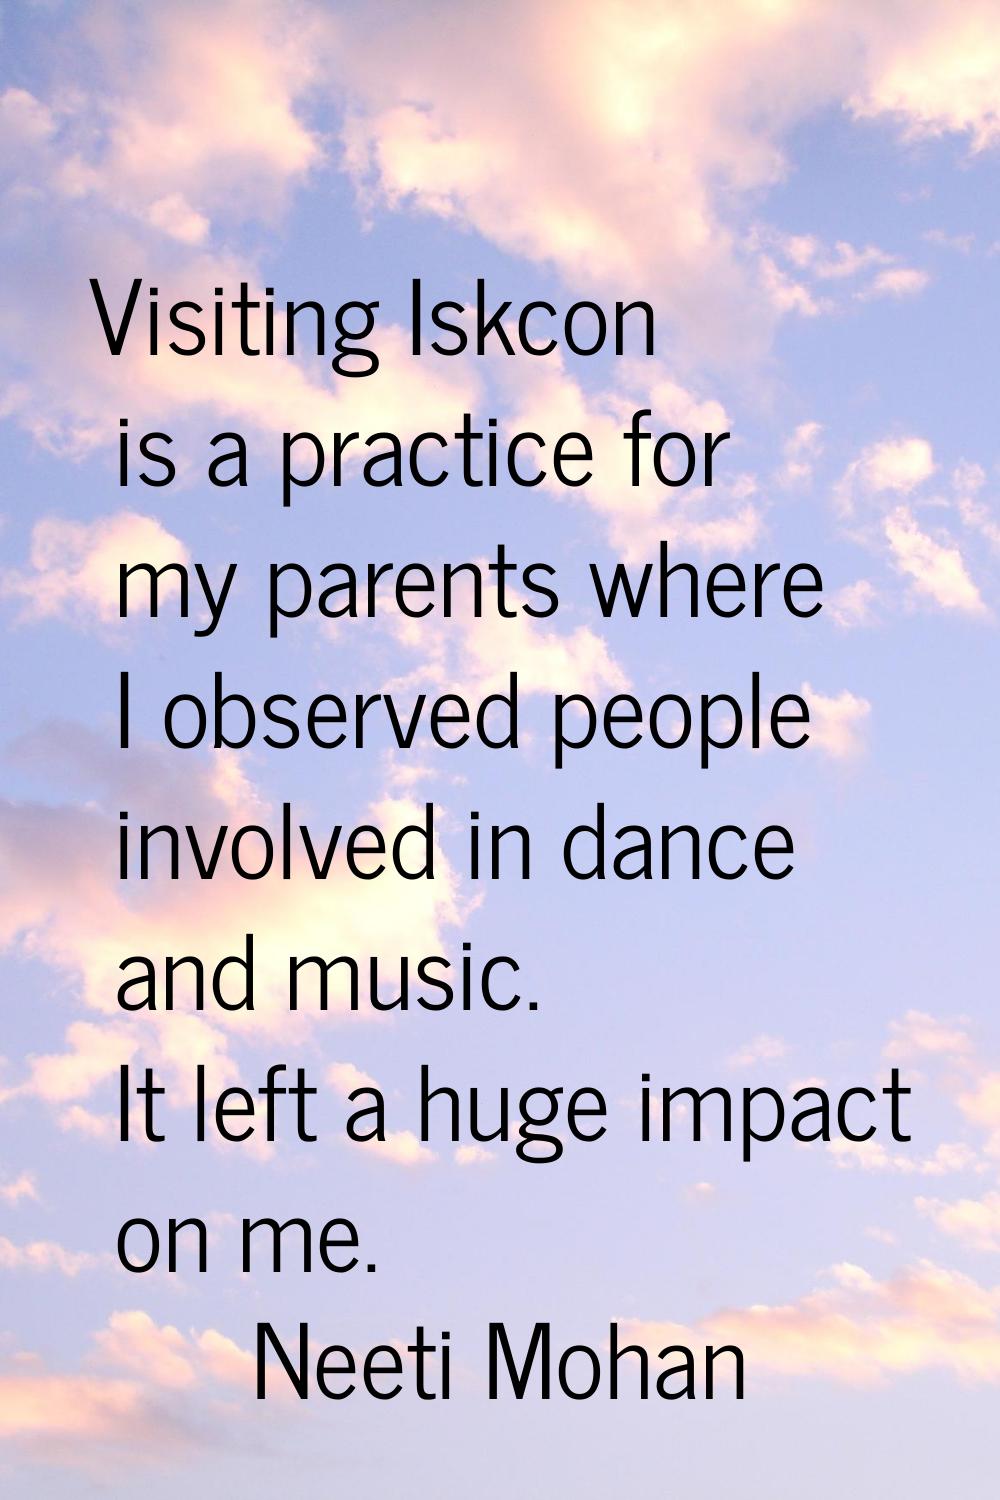 Visiting Iskcon is a practice for my parents where I observed people involved in dance and music. I